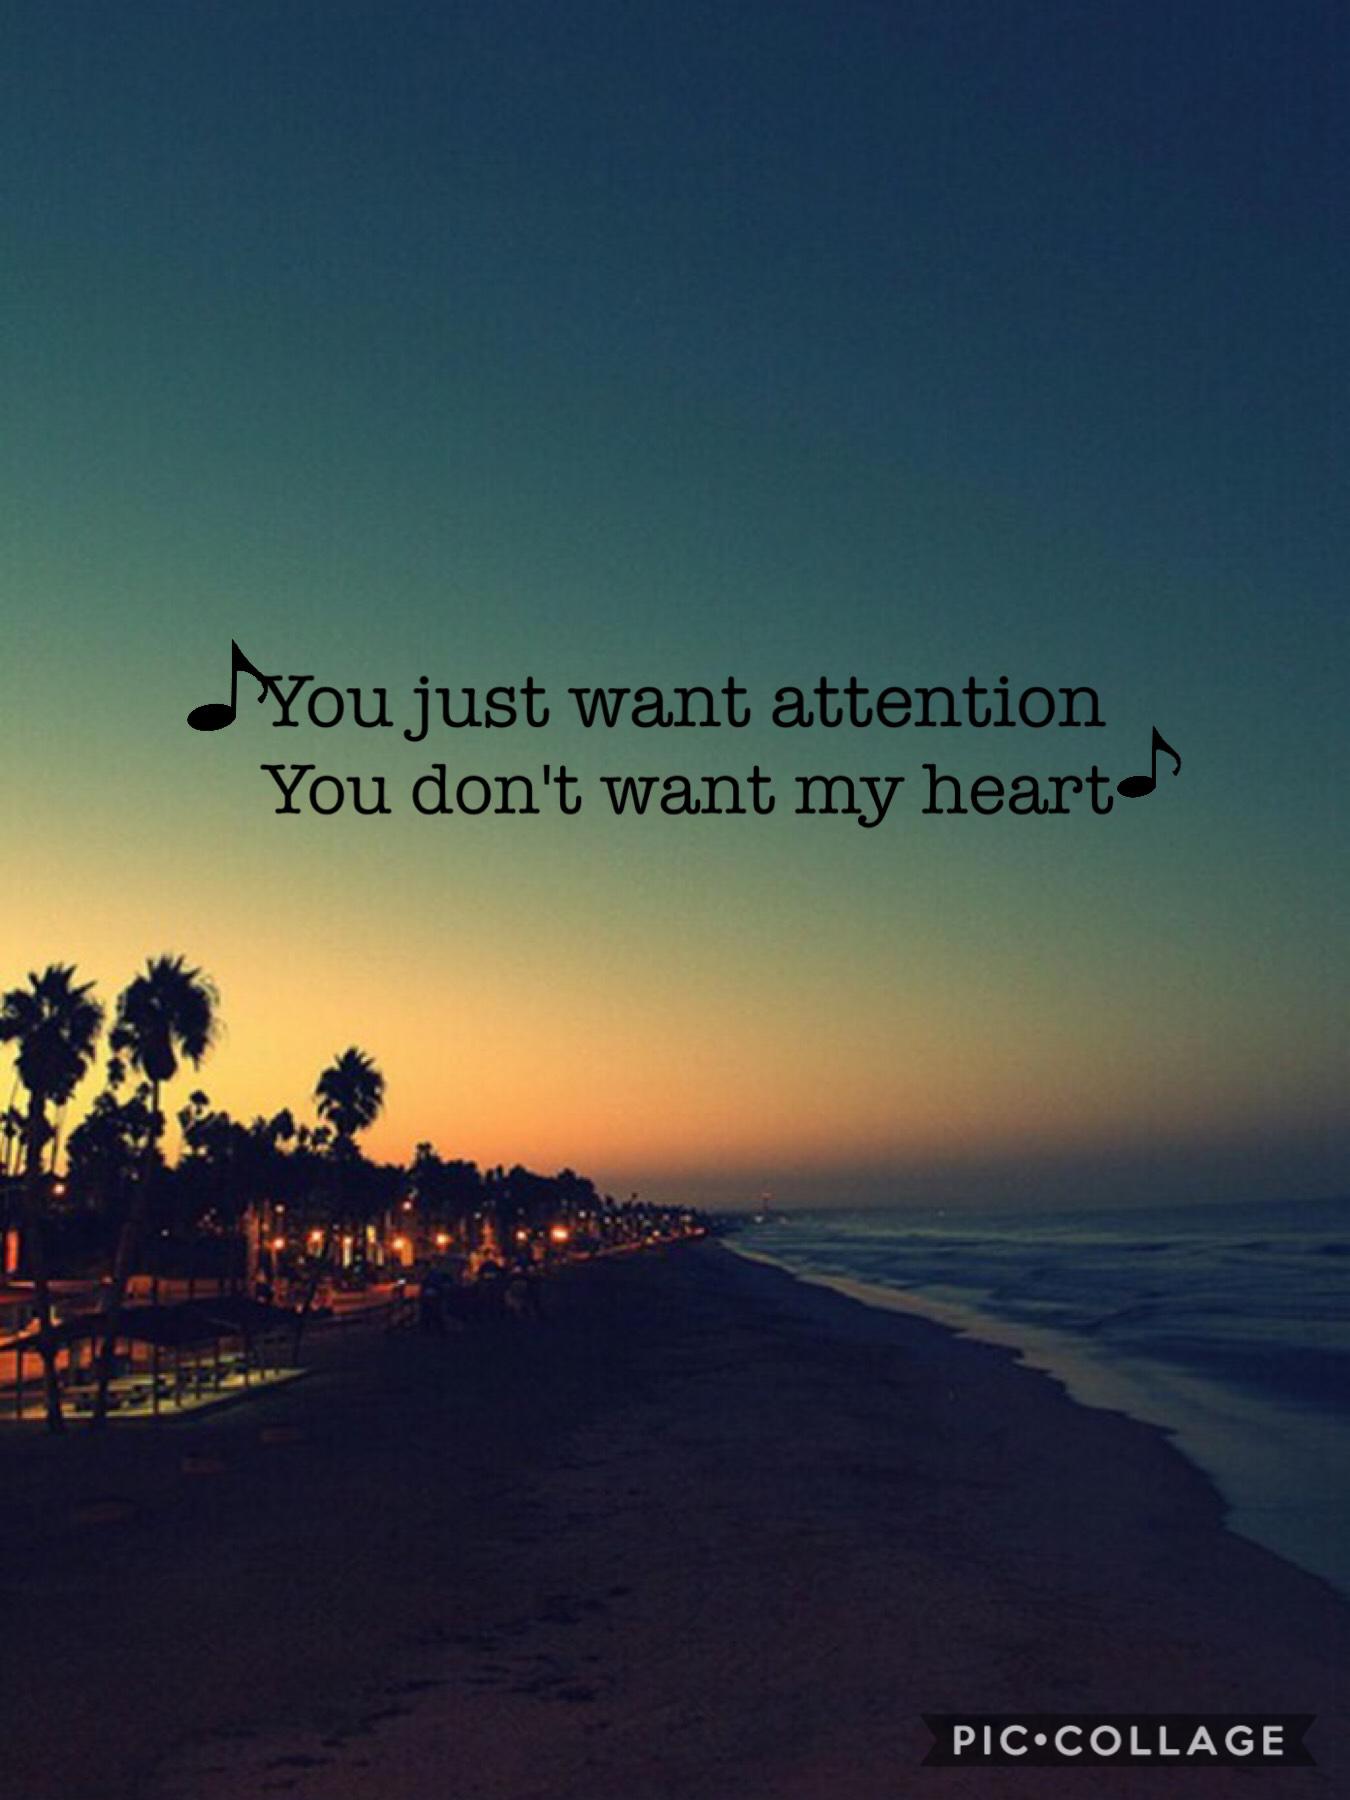 #FavoriteSong #Sad #Love #Attention #Yourself #Music